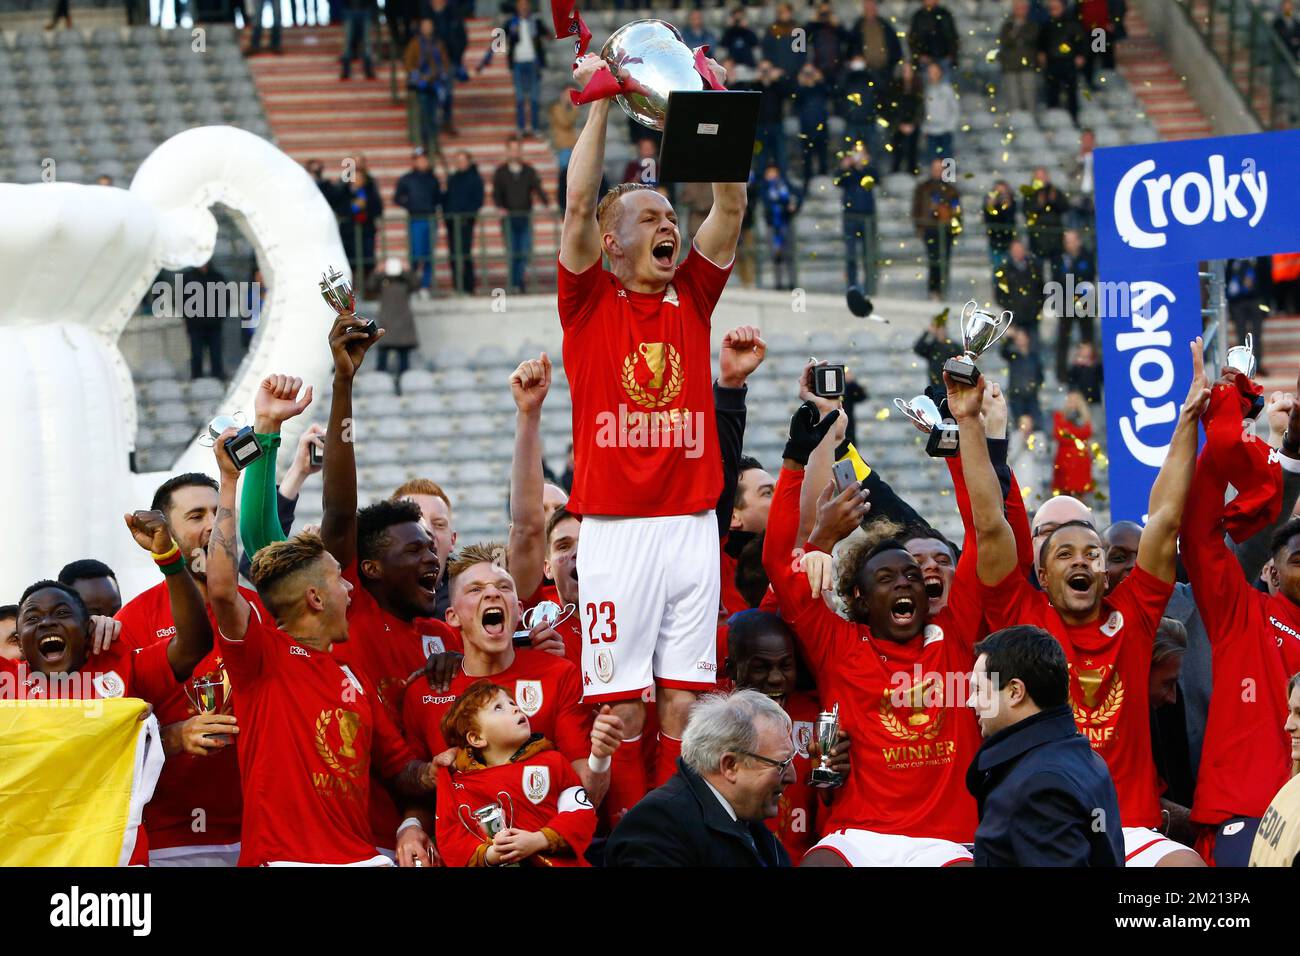 Standard's Adrien Trebel celebrates after winning the Croky Cup final between Belgian soccer teams Club Brugge and Standard de Liege, on Sunday 20 March 2016, in Brussels. Stock Photo